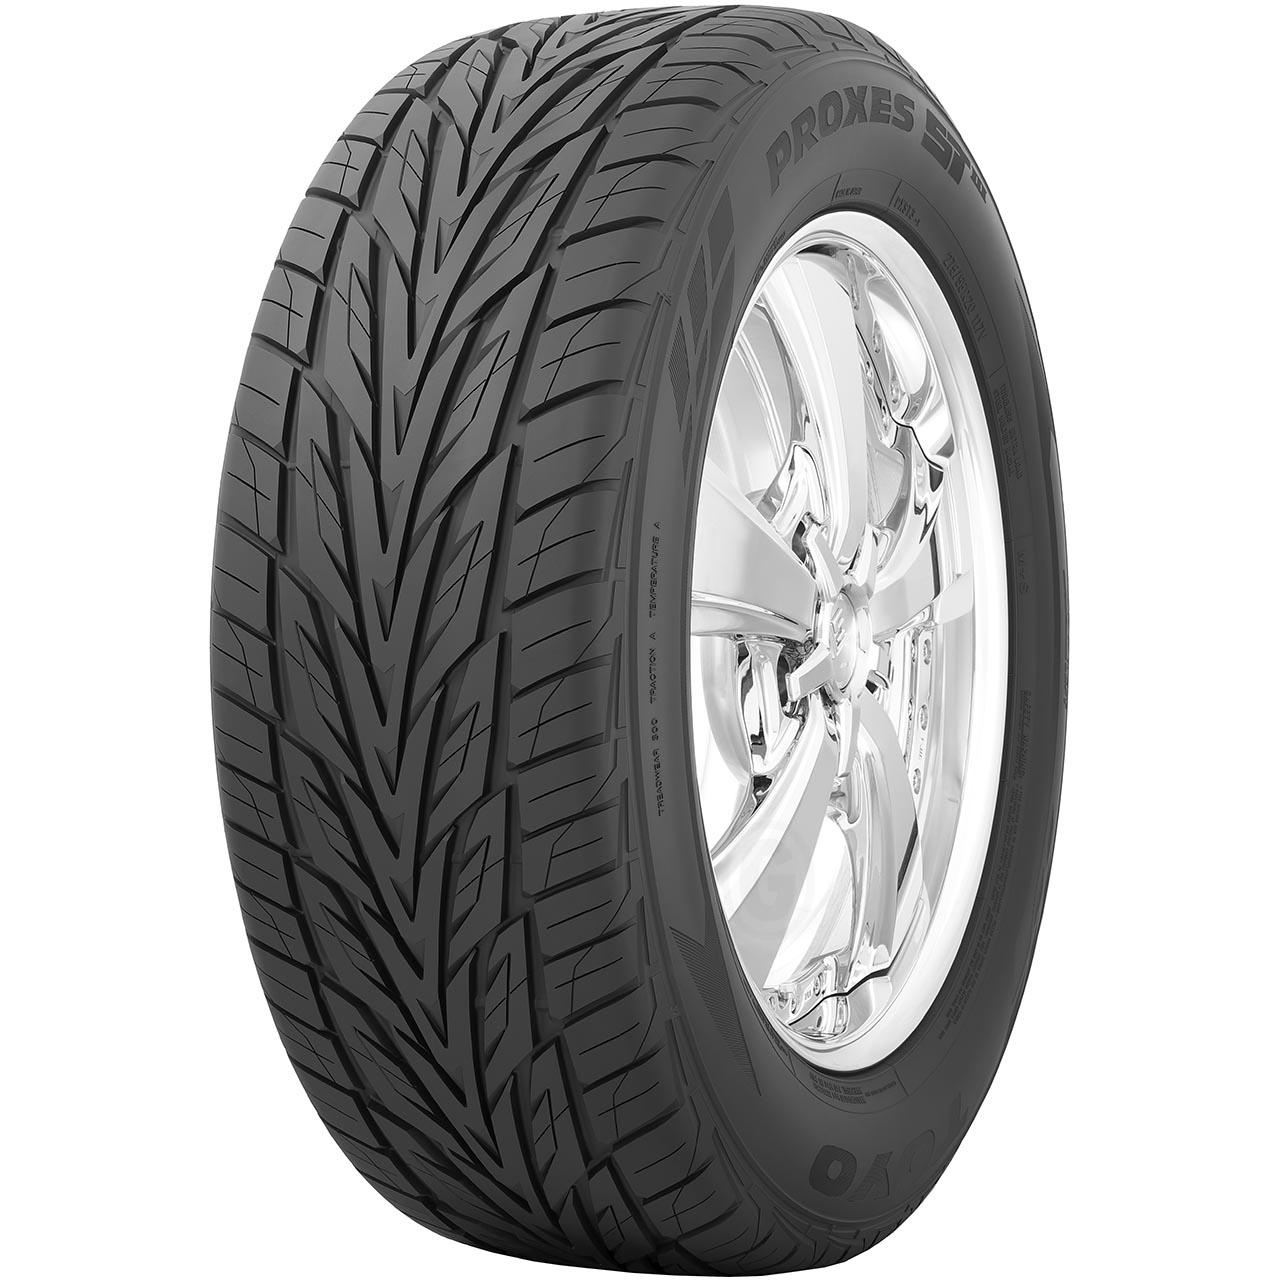 TOYO PROXES S/T III 255/50R19 107V